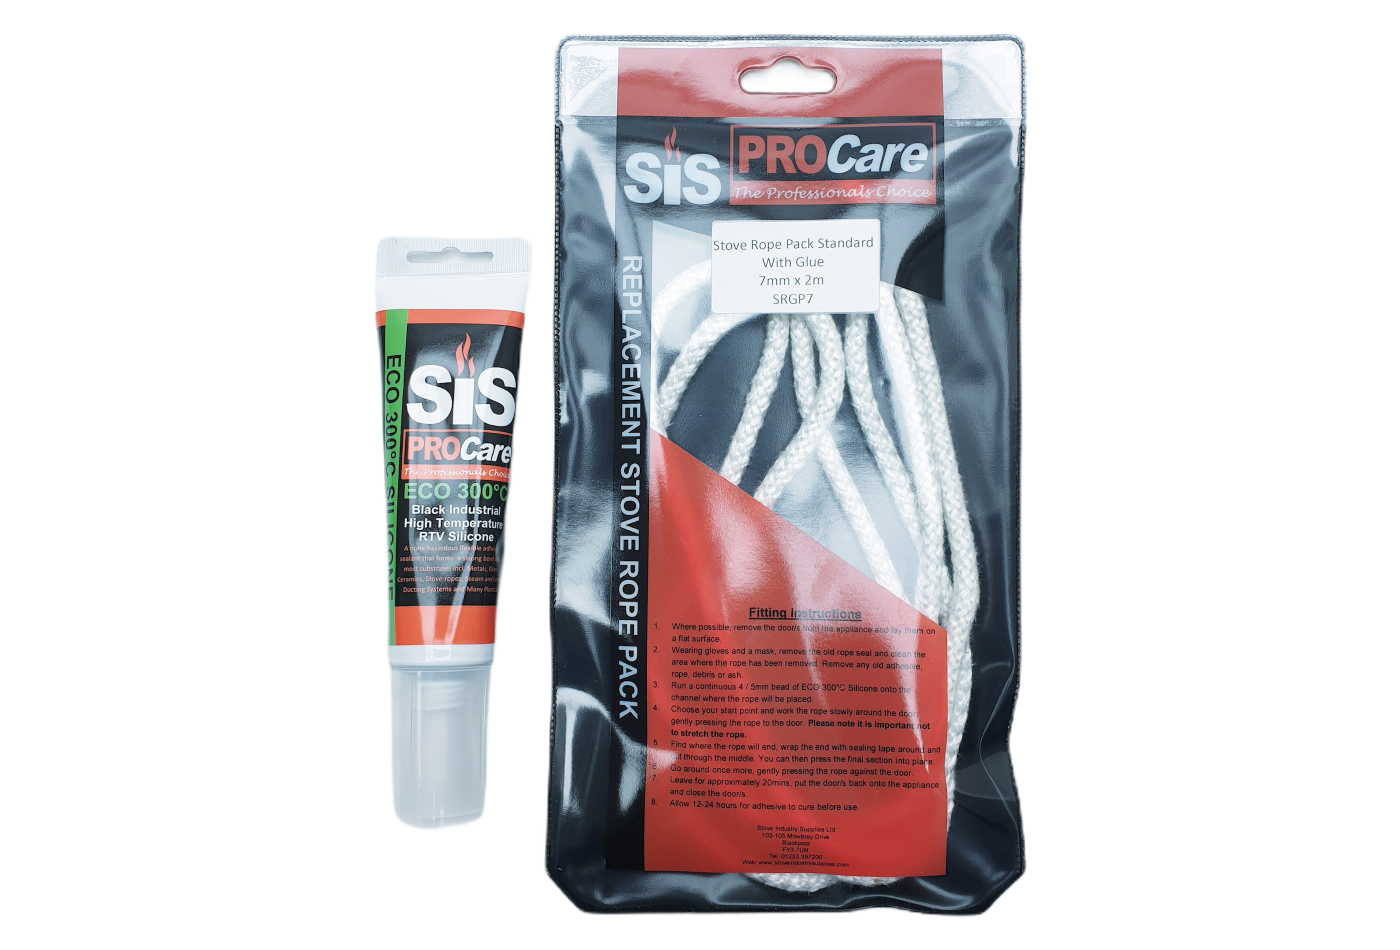 SiS Procare White 7 milimetre x 2 metre Standard Stove Rope & 80 millilitre Rope Glue Pack - product code SRGP7